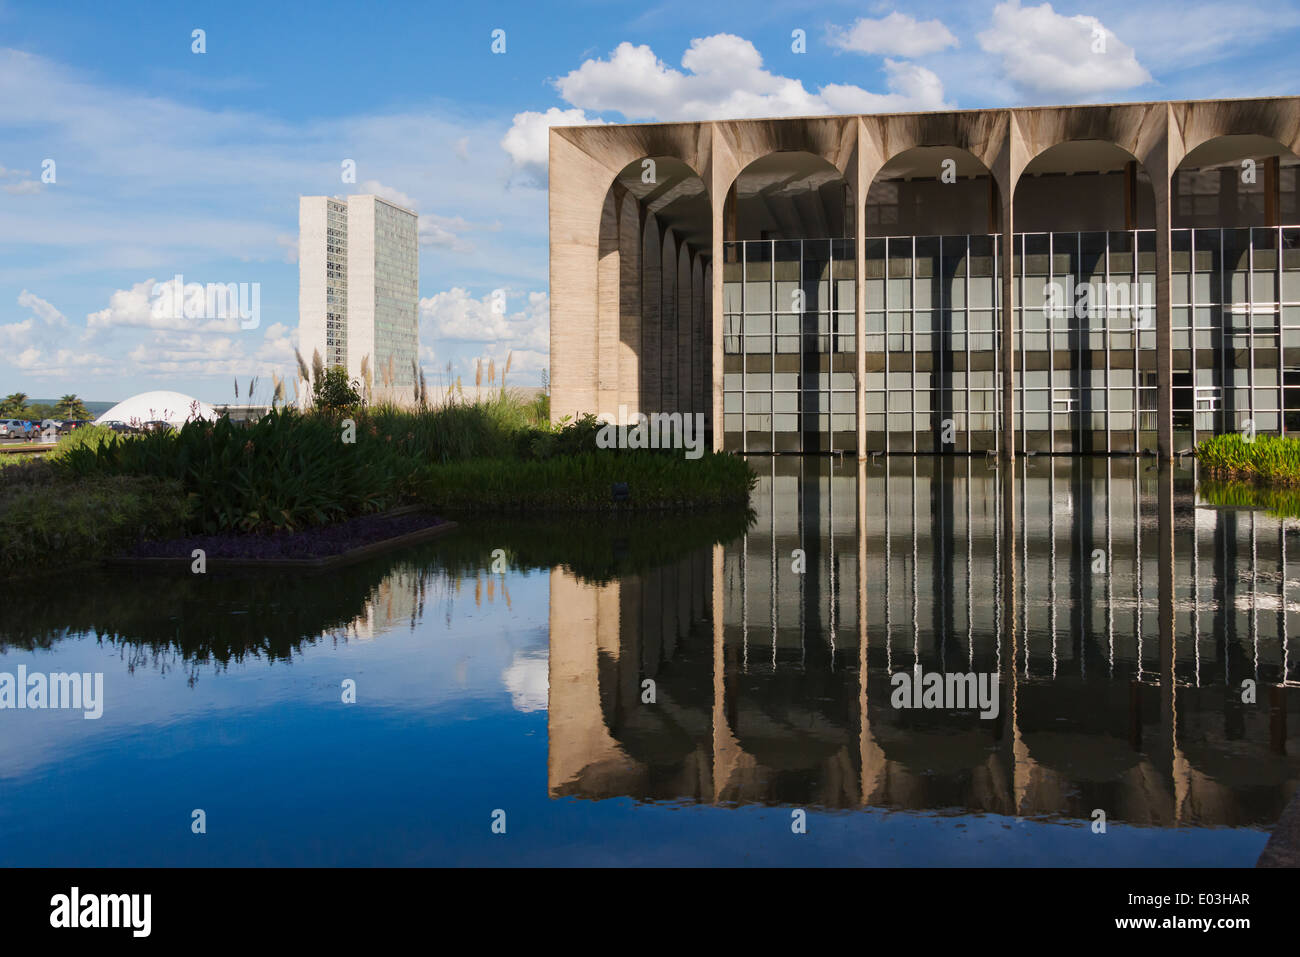 The Itamaraty Palace (the headquarters of the Ministry of External Relations of Brazil) and National Congress, Brasilia, Brazil Stock Photo